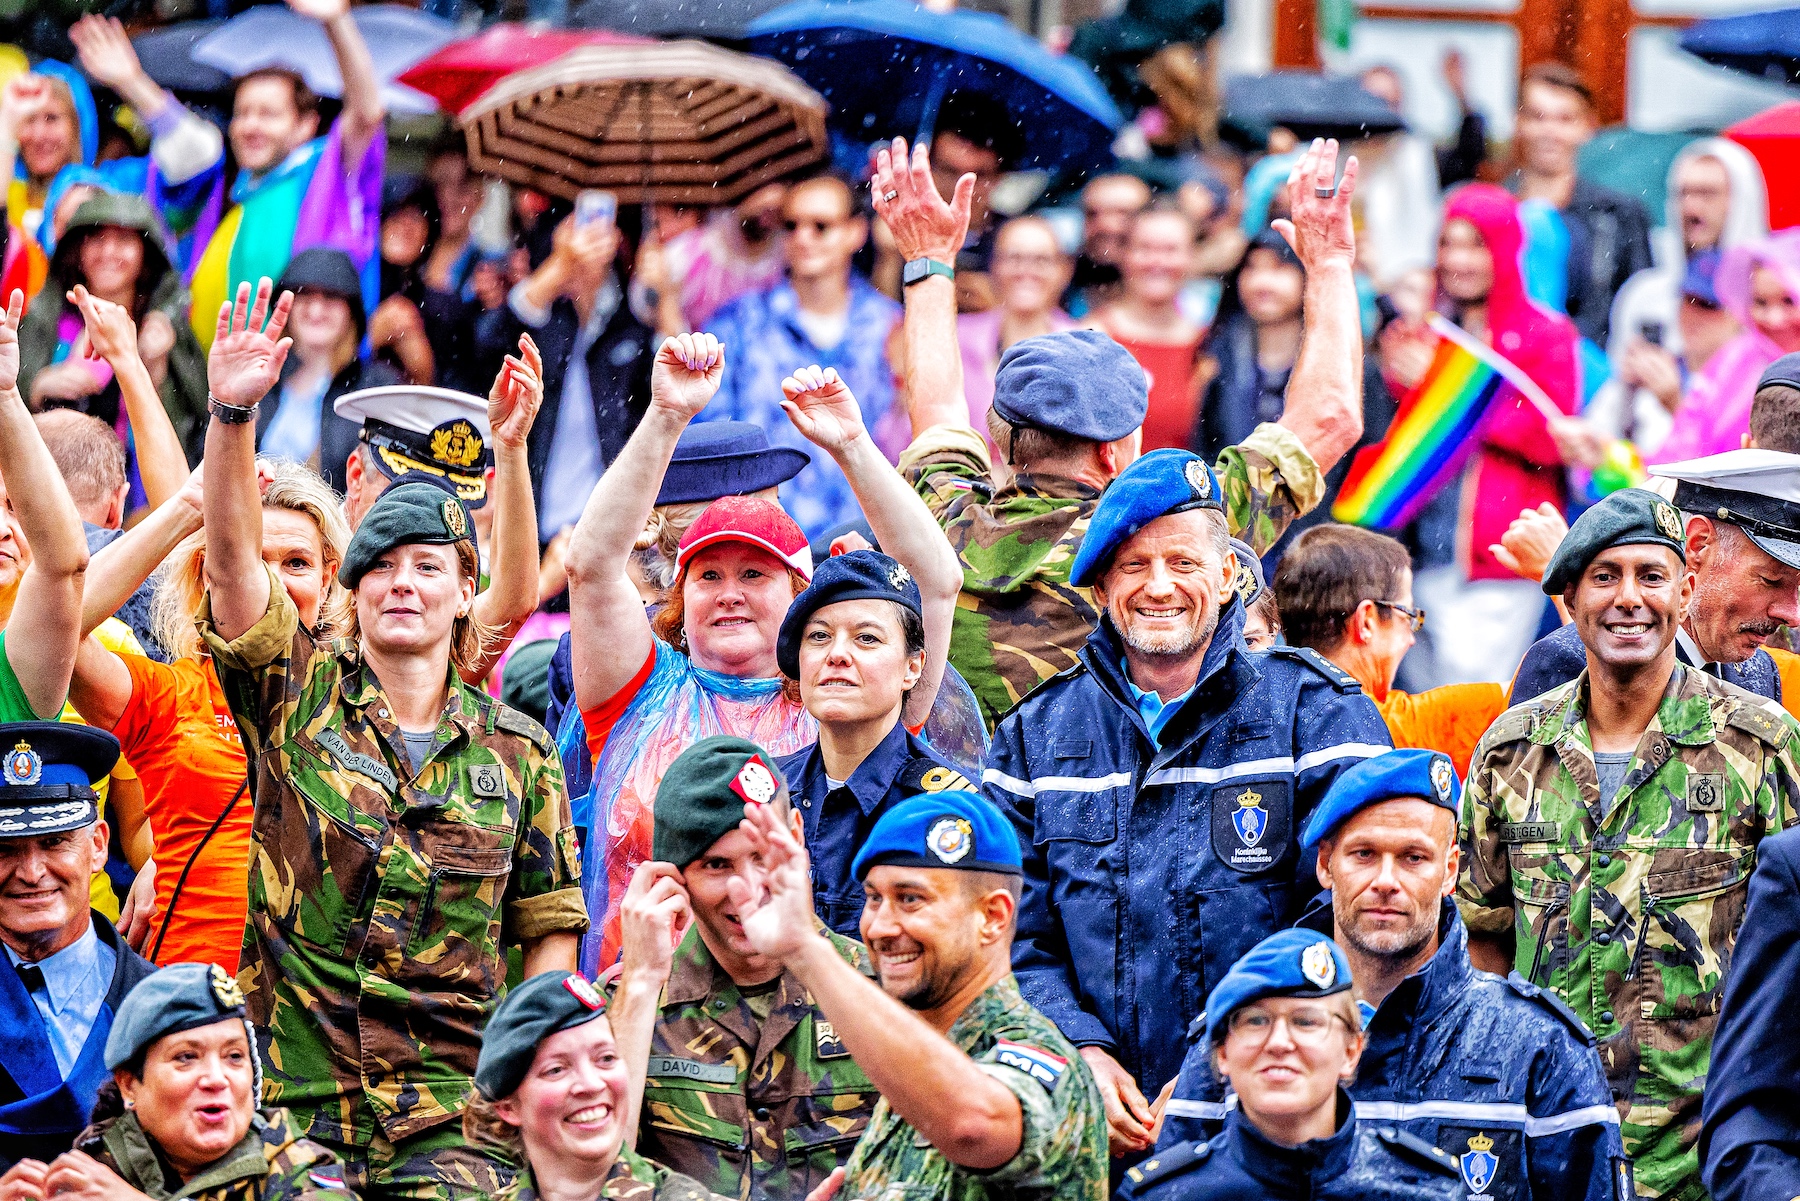 Dutch royals, wearing military-style uniforms, attend Pride march in Amsterdam.